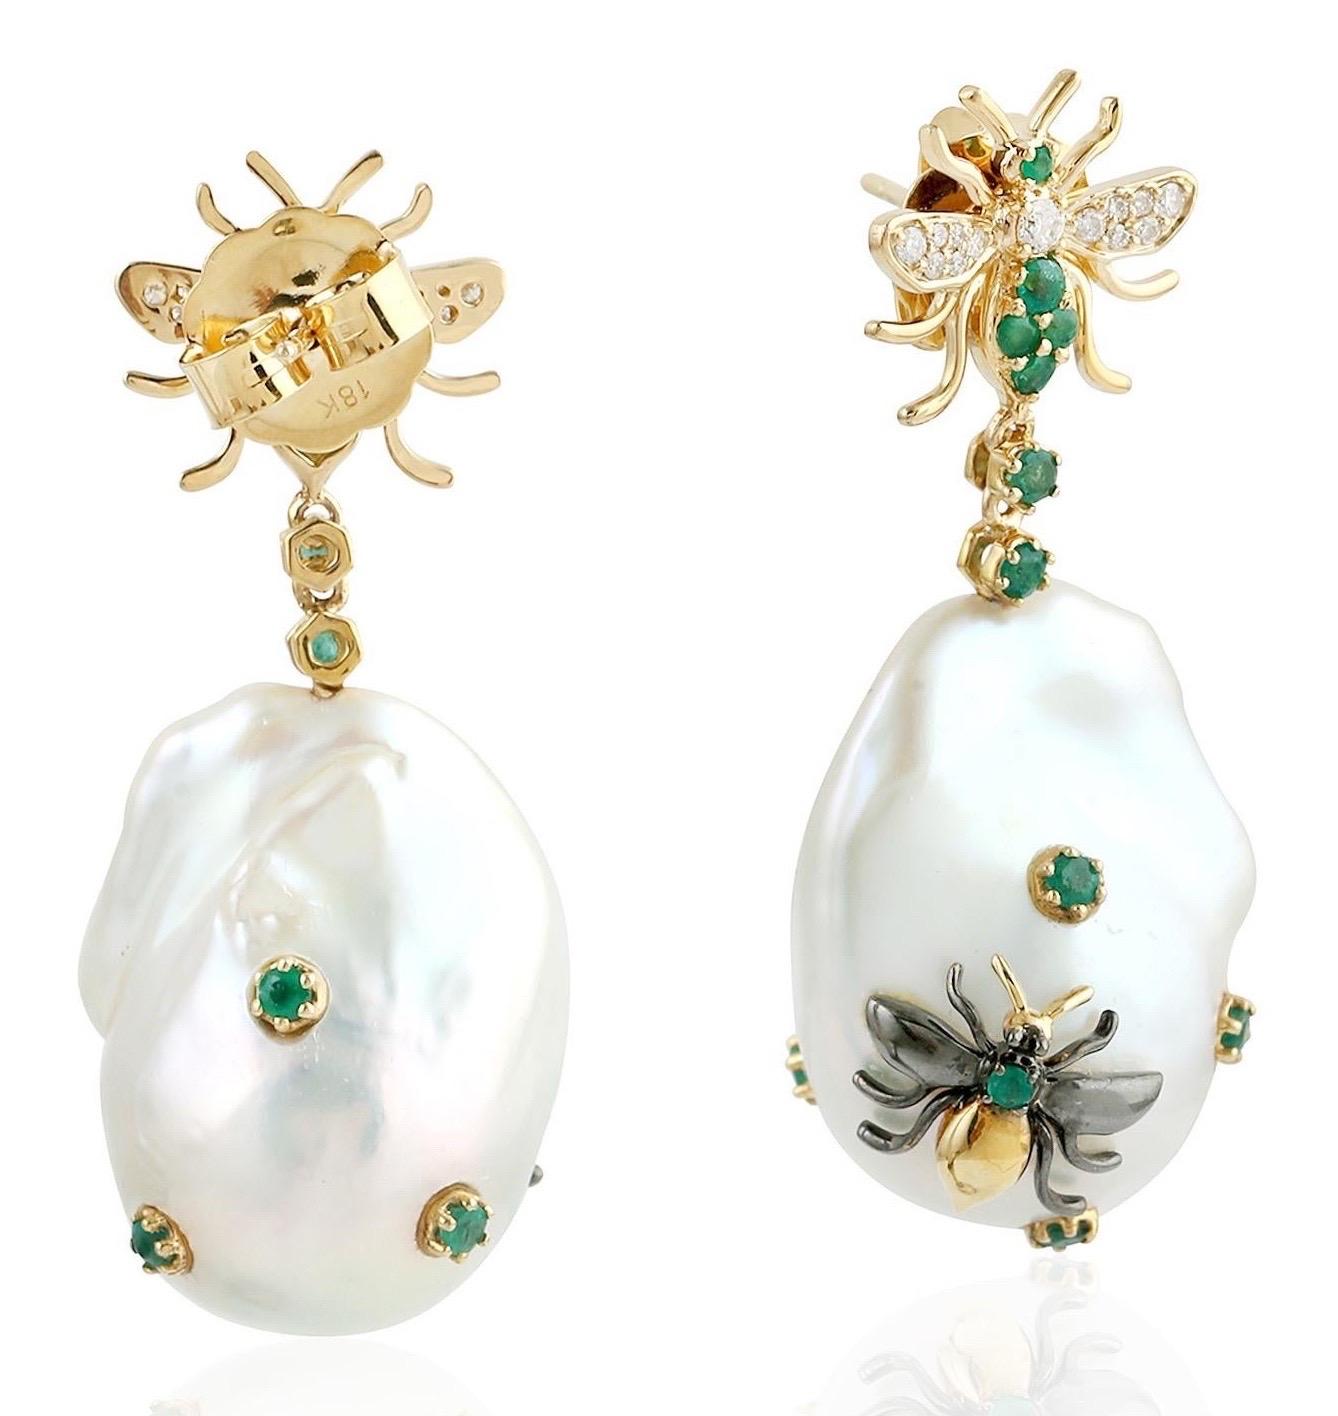 These pearl earrings are thoughtfully and meticulously crafted with   
18 Karat yellow gold.  It is set with 71.6 carats pearl, .77 carats emerald and .23 carats of diamonds.

FOLLOW  MEGHNA JEWELS storefront to view the latest collection &